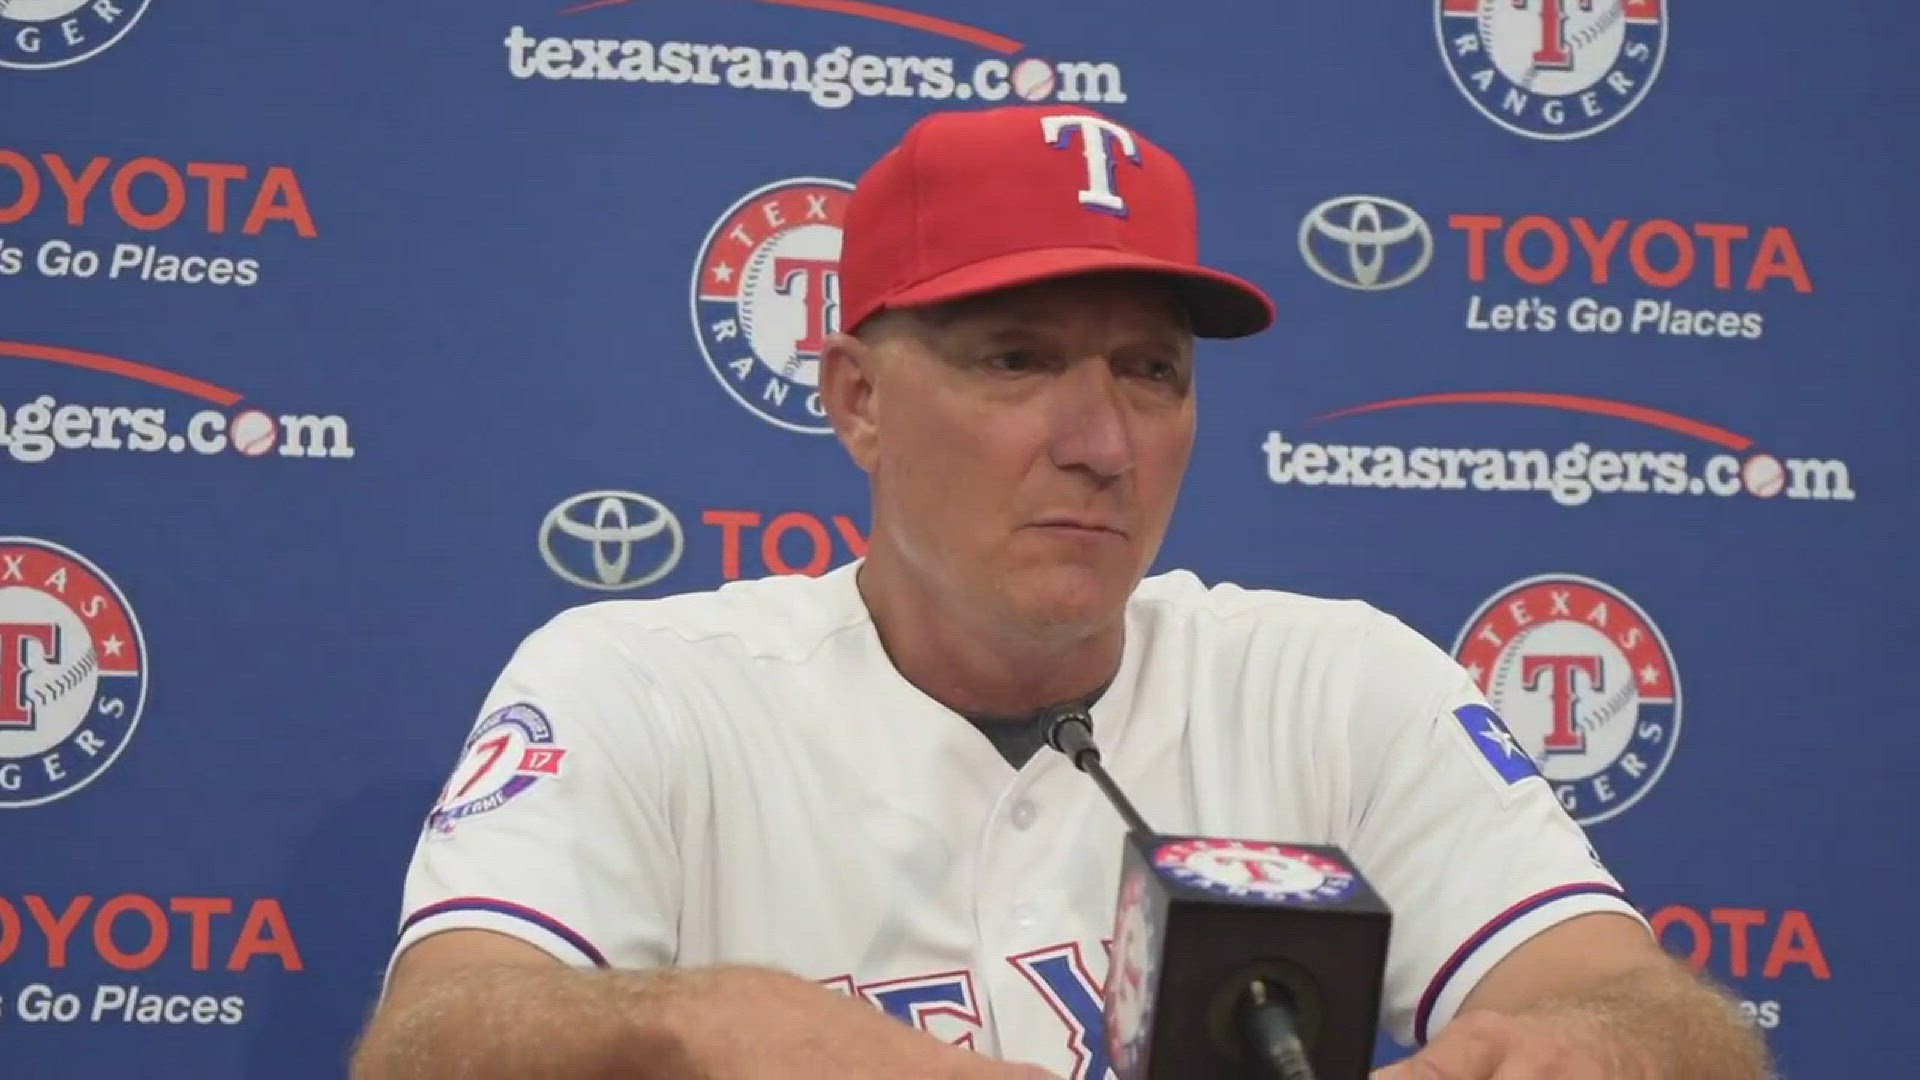 Jeff Banister discusses the importance of seeing Adrian Beltre get his 3,000th hit.